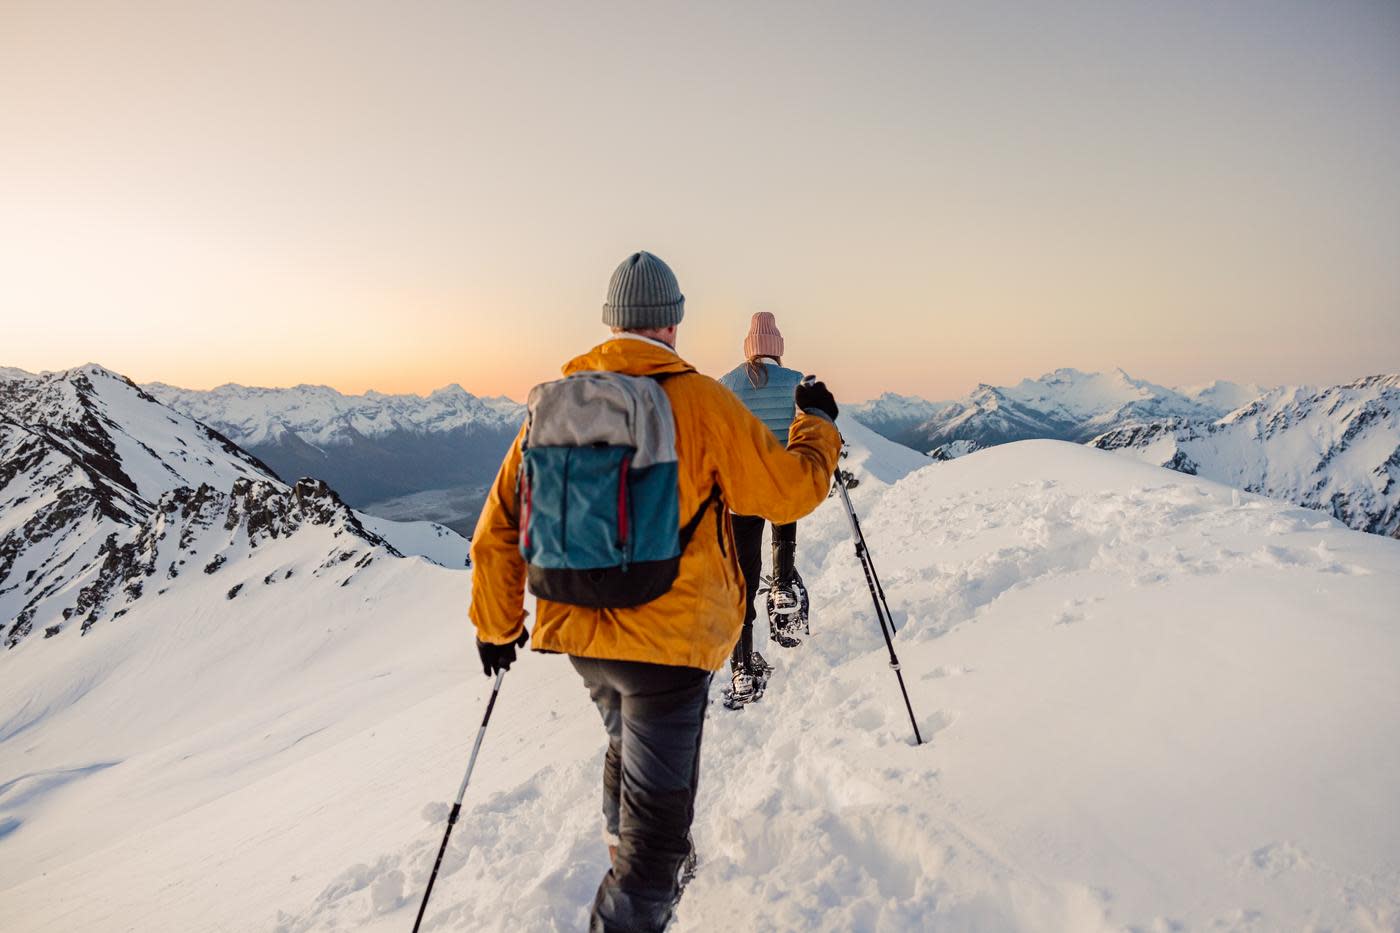 Point of view image with two people snow shoeing surrounded by snow covered mountains